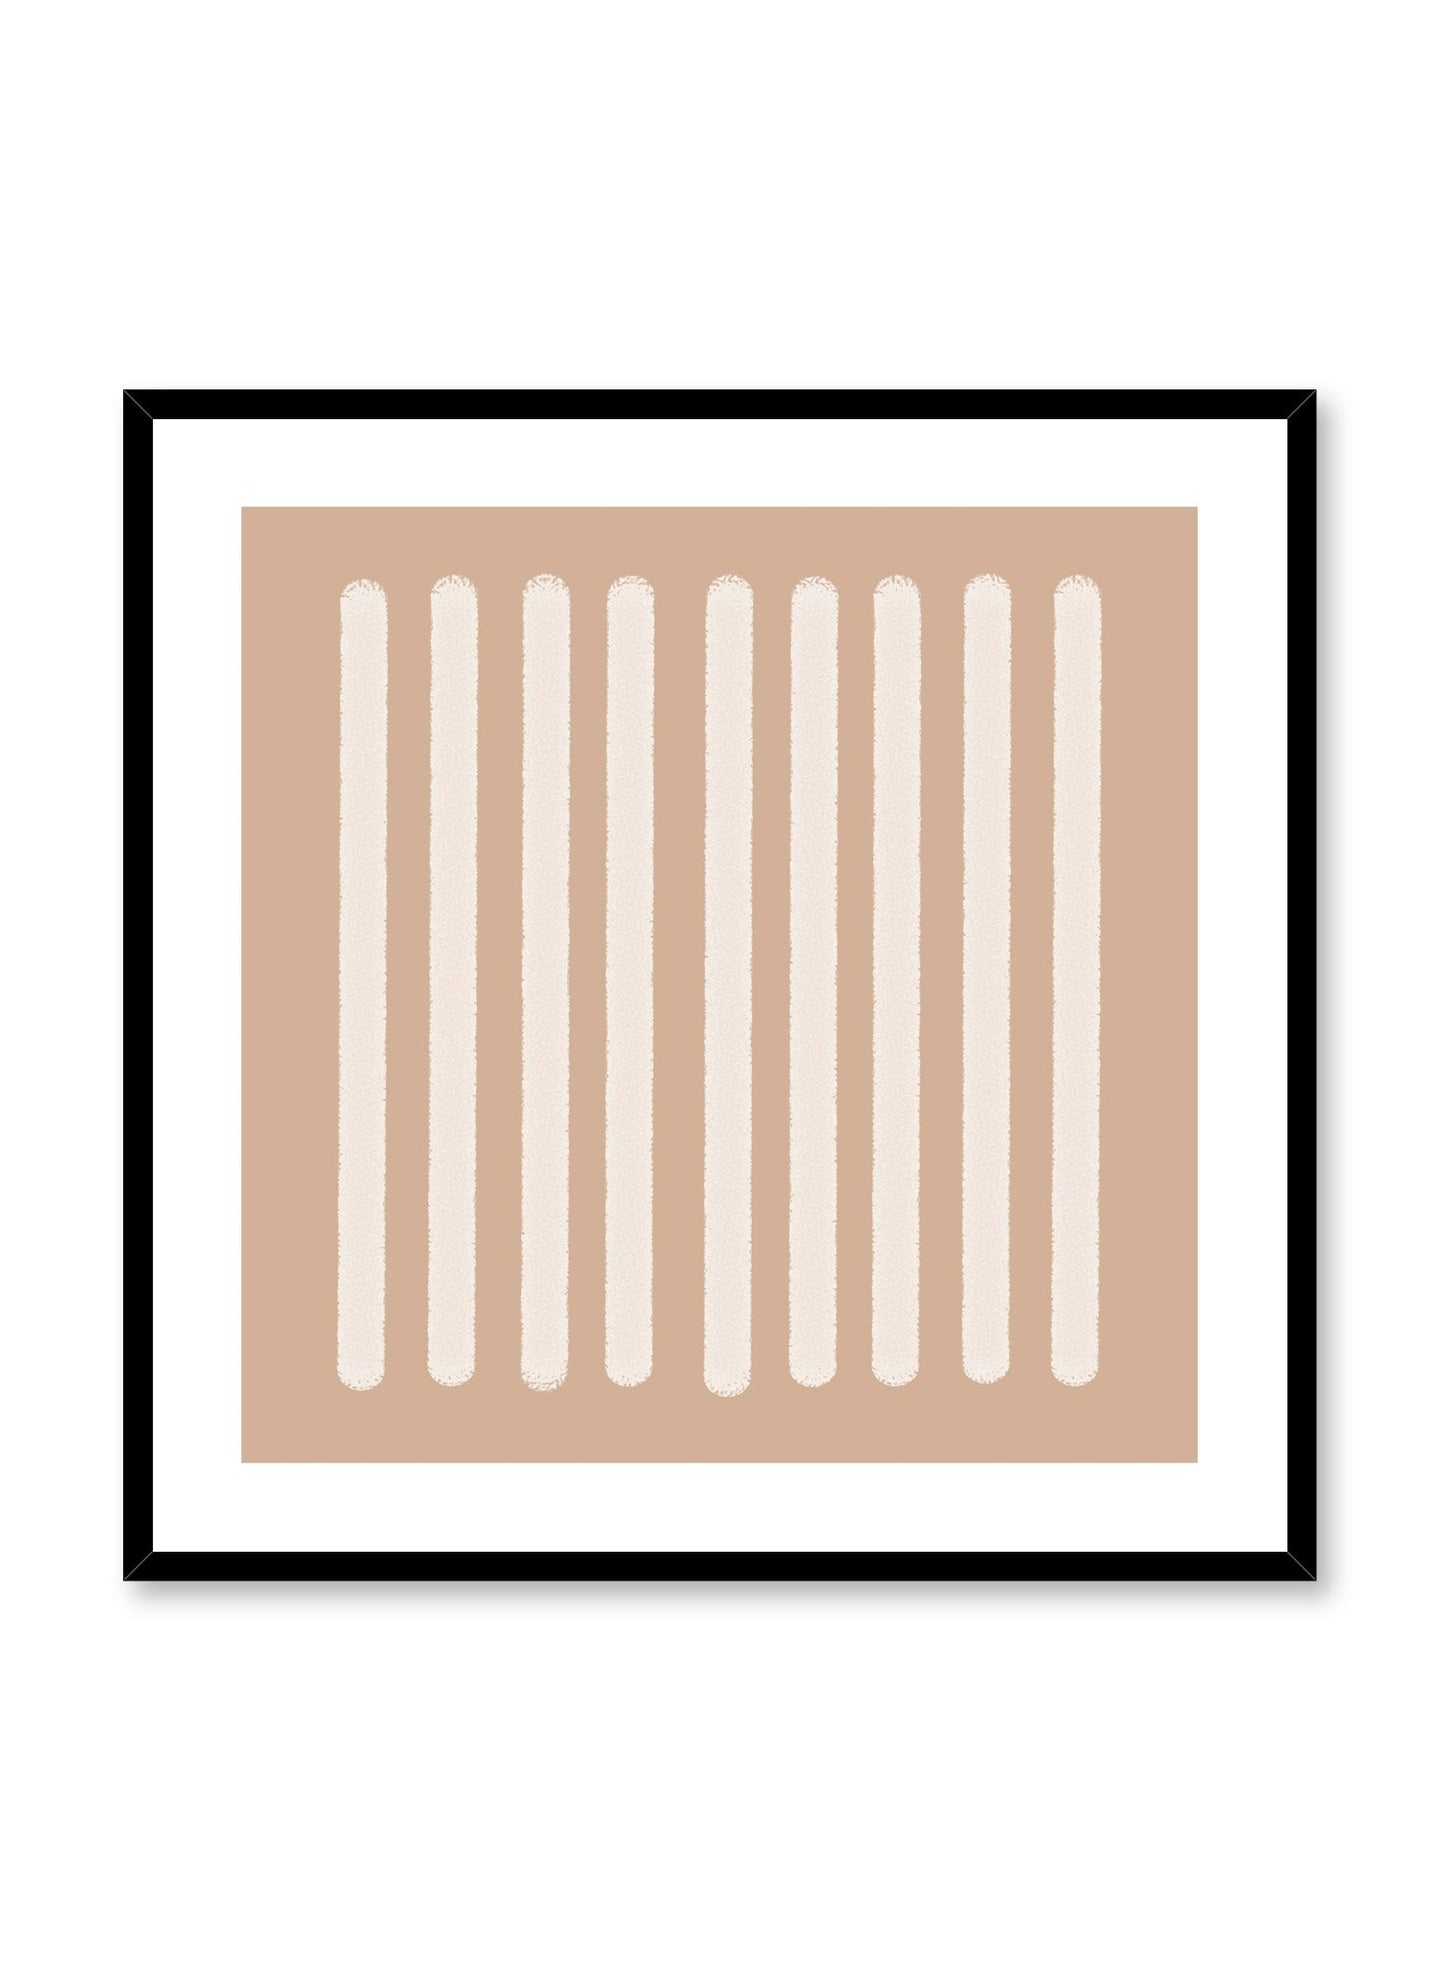 Minimalist design poster by Opposite Wall with abstract beige rectangle shapes in square format